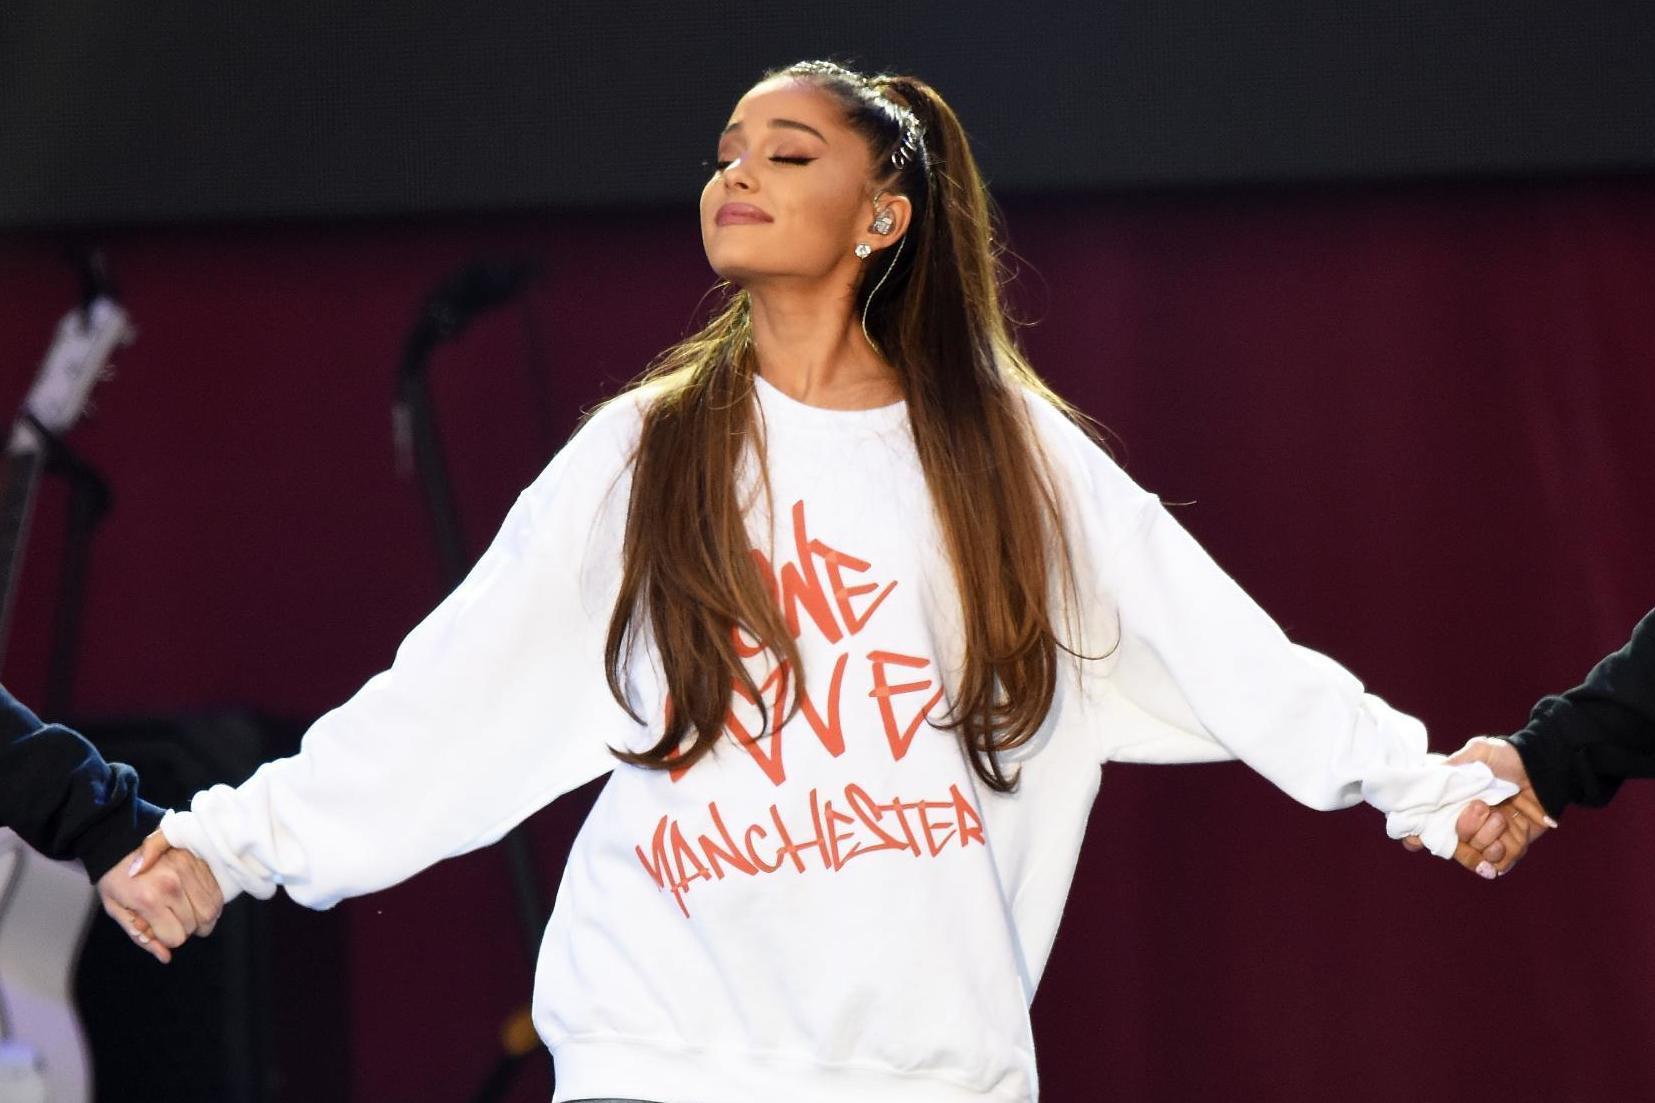 Credit: Getty Images/Dave Hogan for One Love Manchester